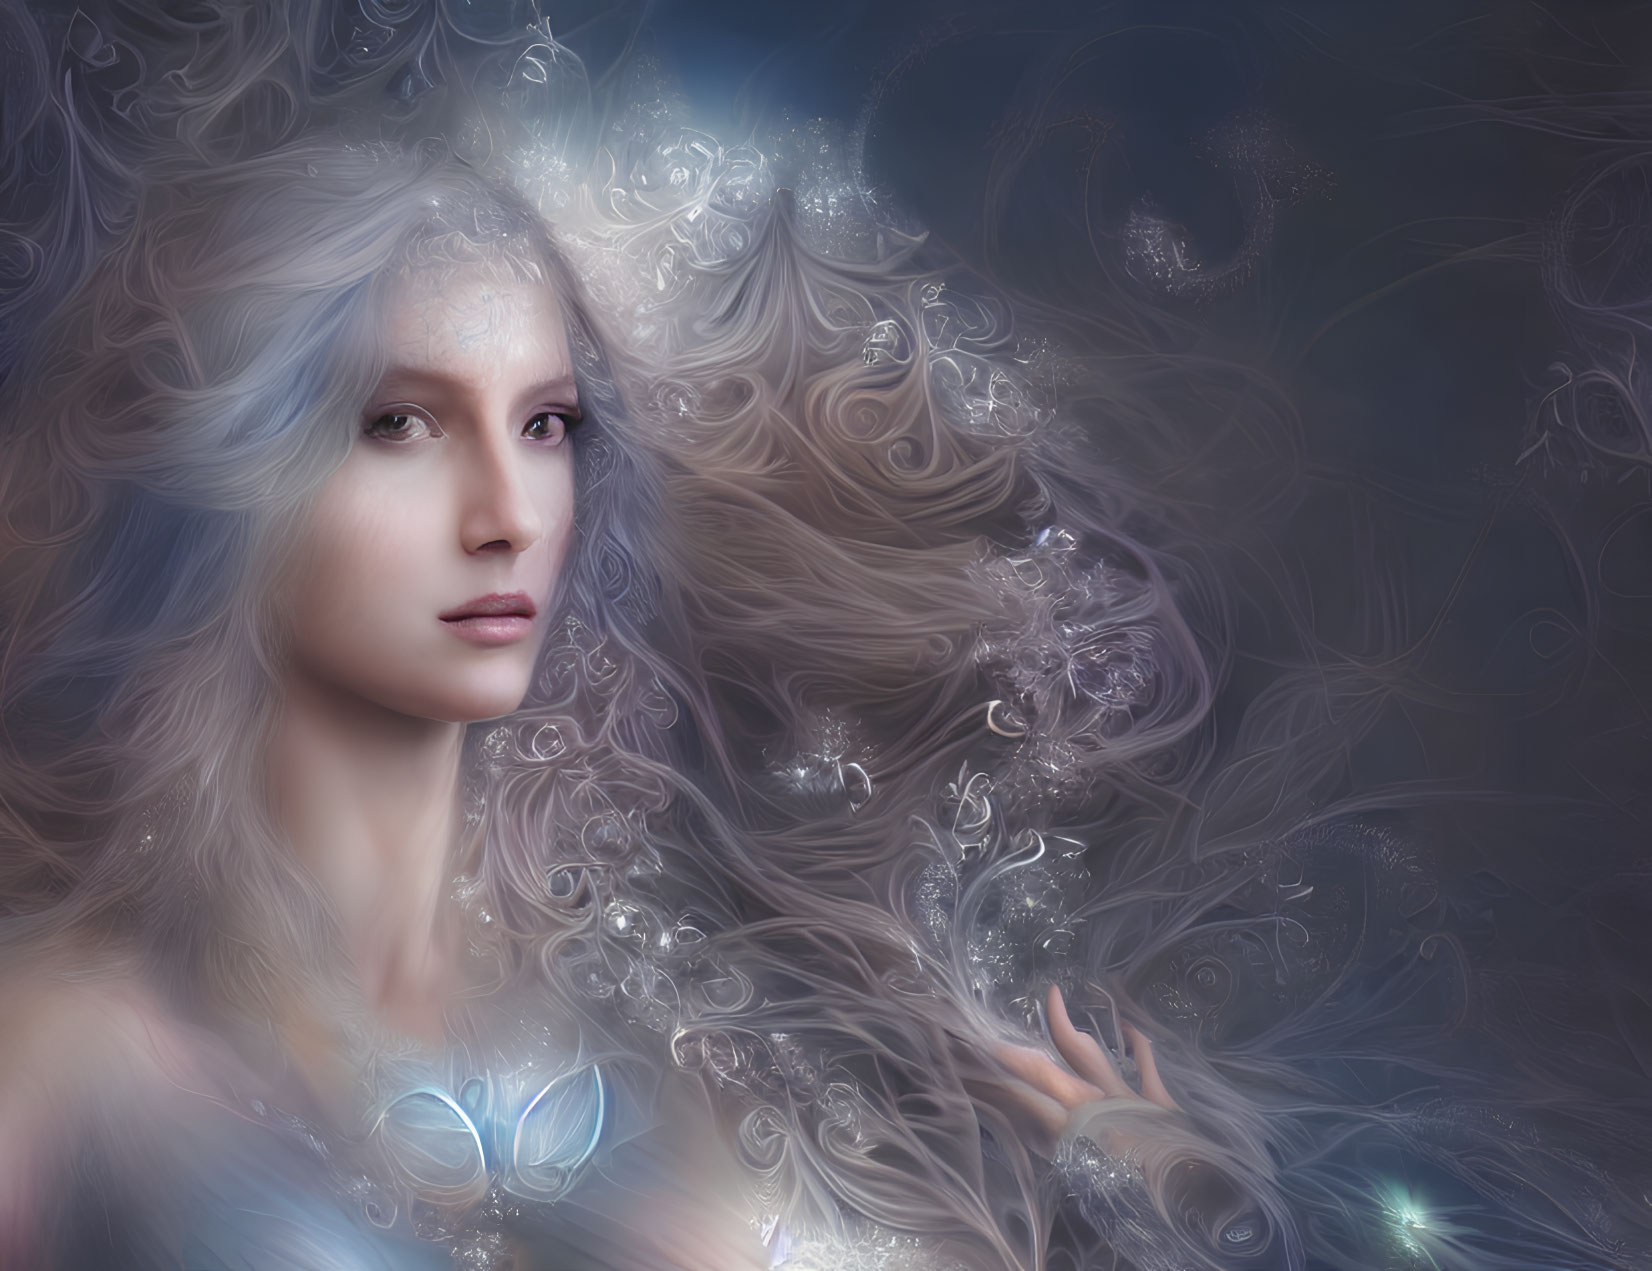 Pale-skinned woman with silver hair in mystical setting